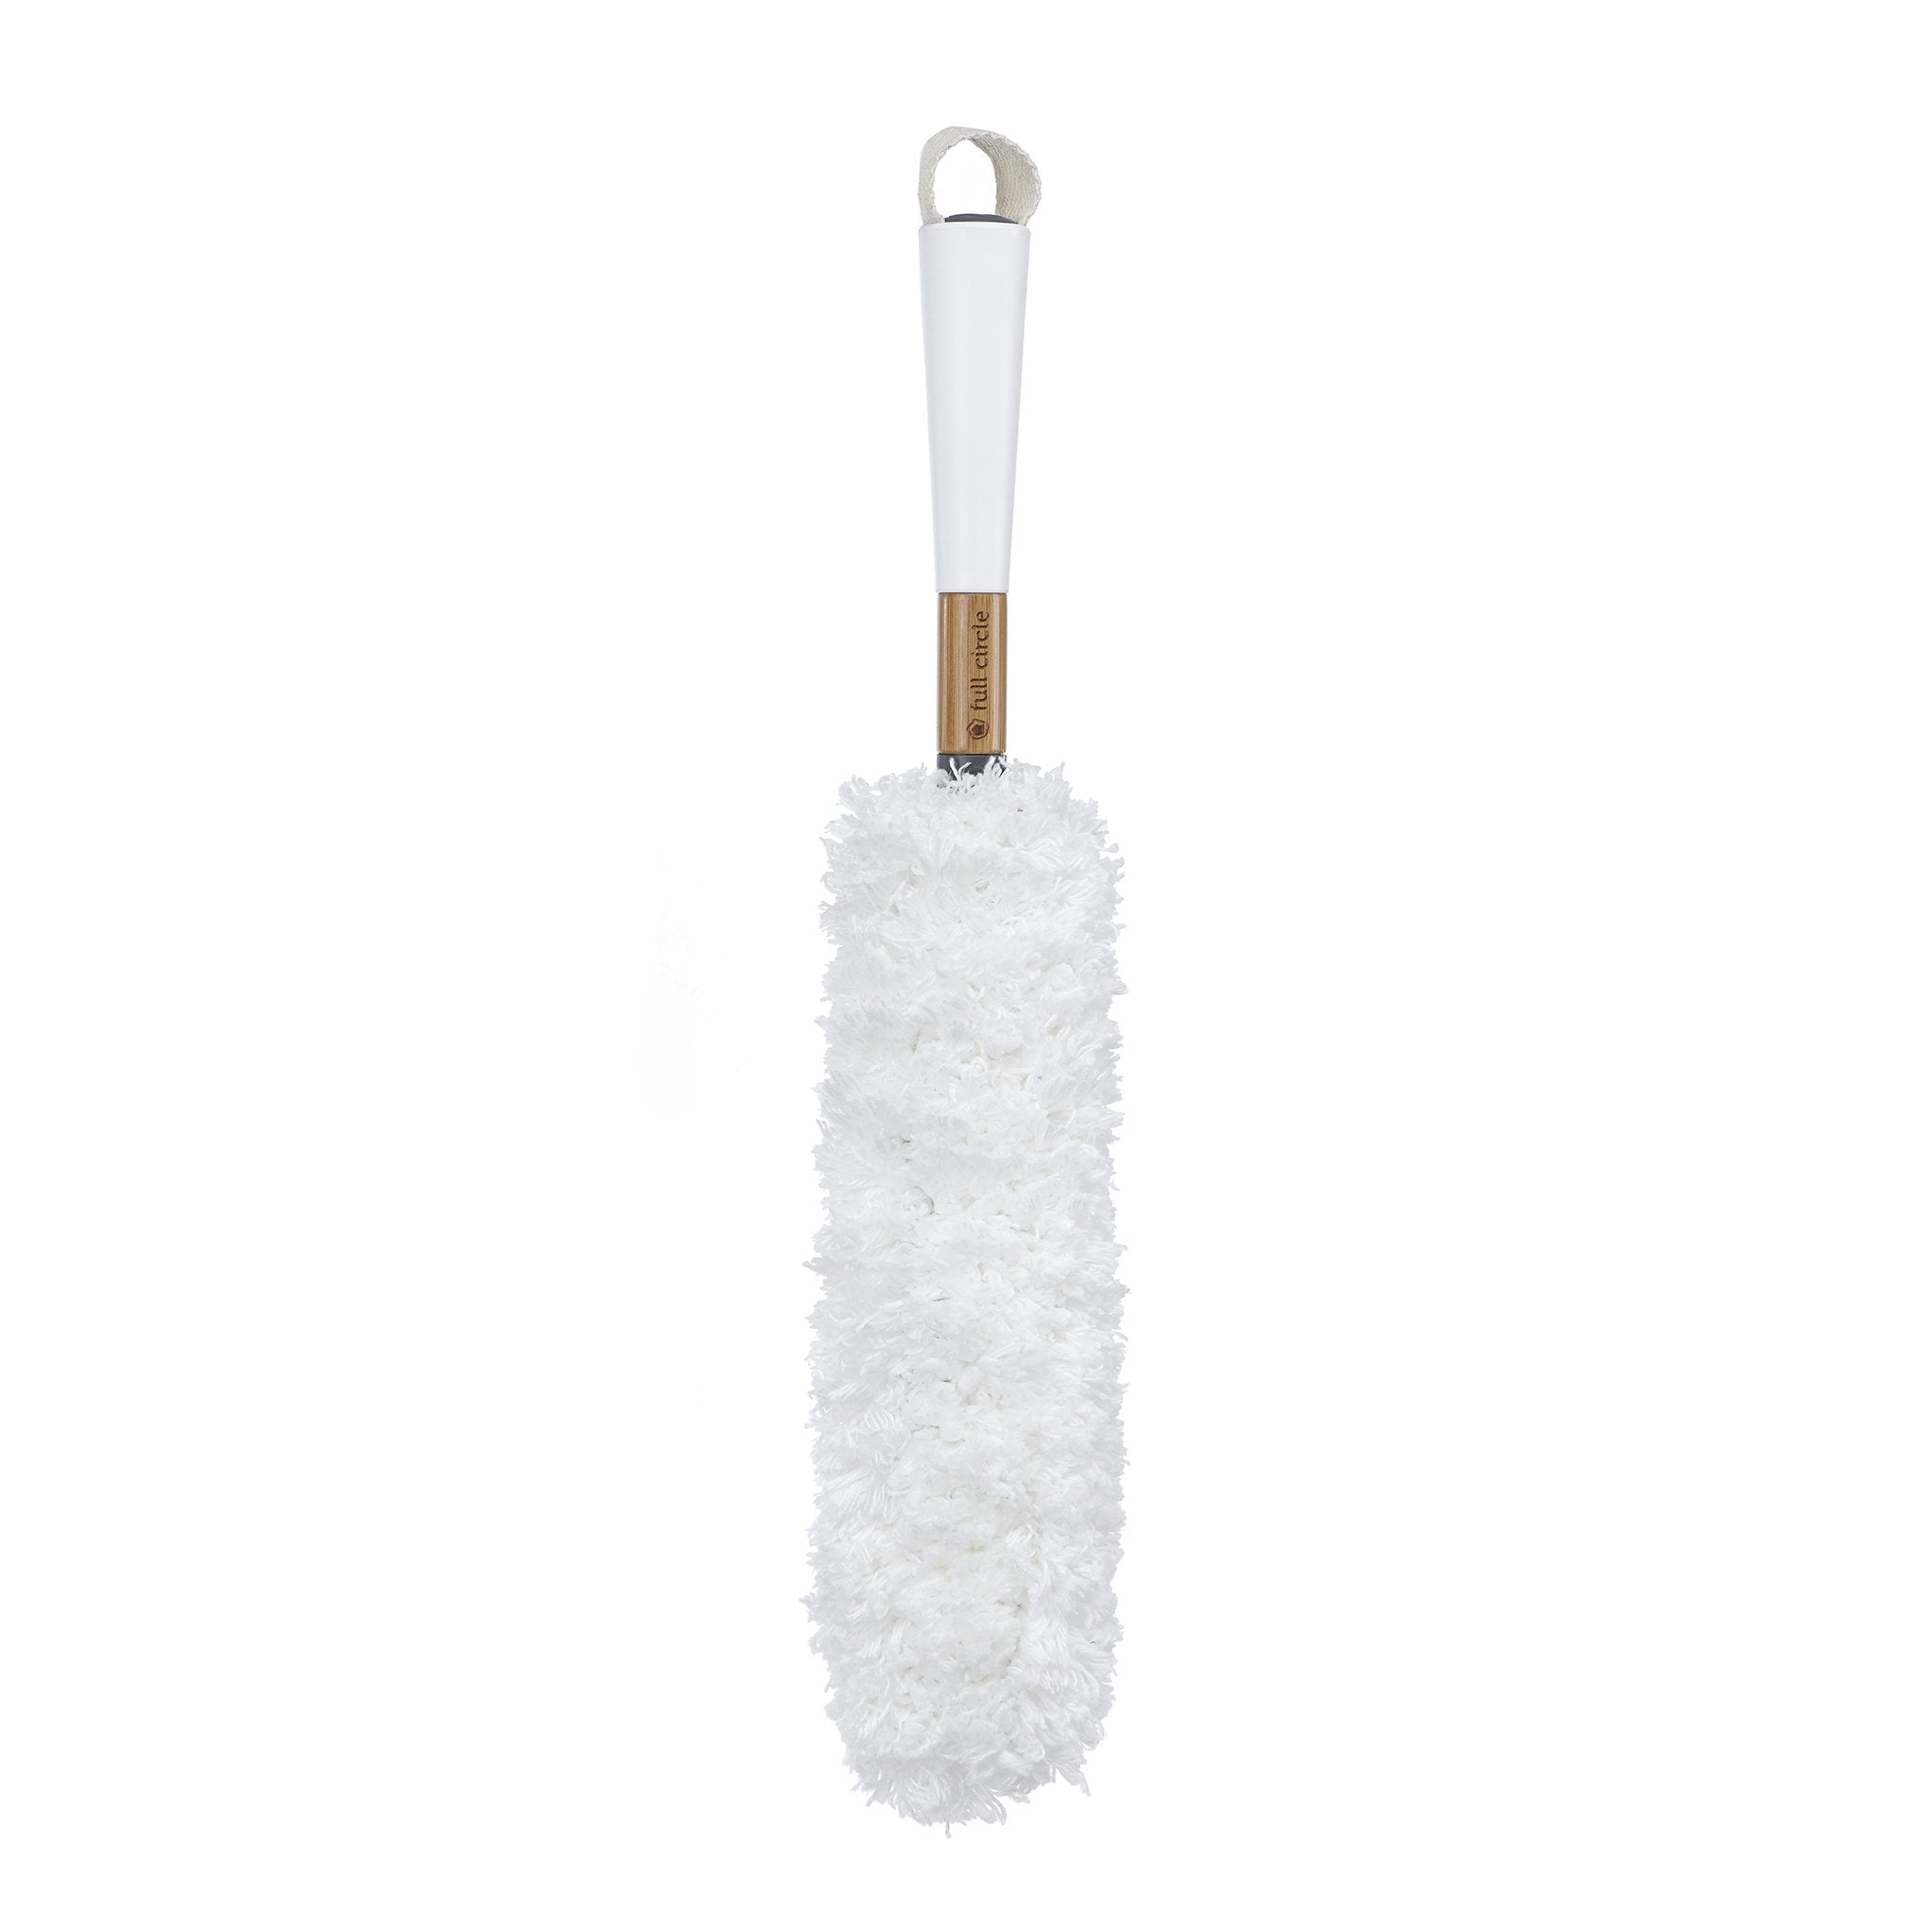 Set of 2 Washable and Reusable Duster Refills 